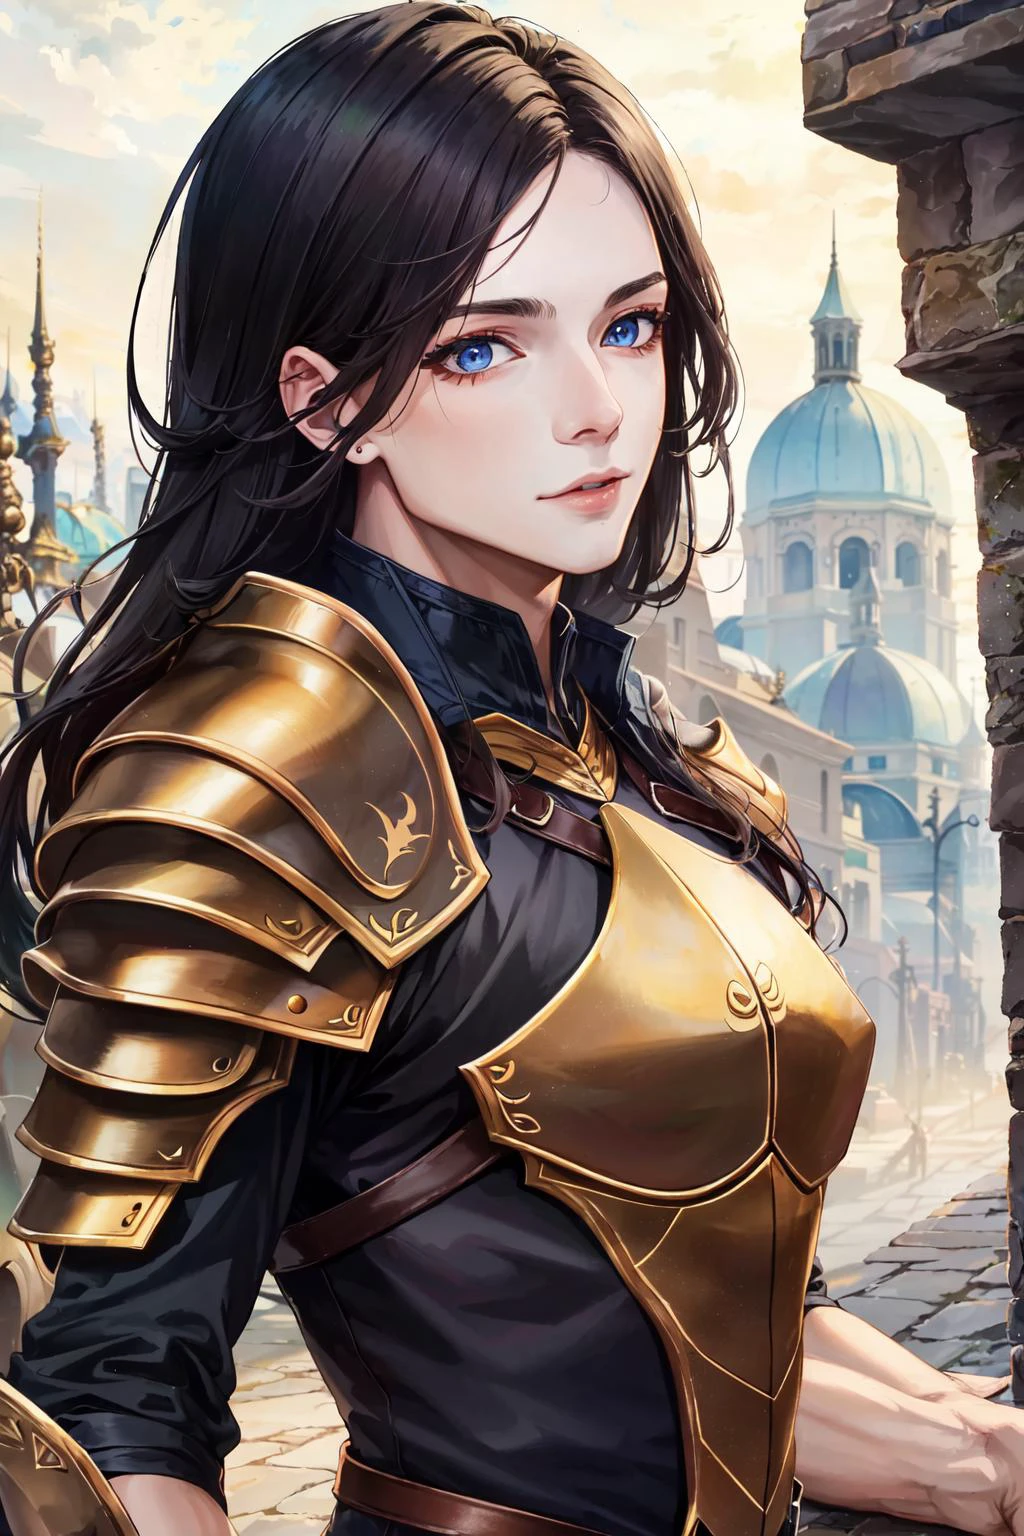 (masterpiece:1.2), (best quality:1.2), perfect eyes, perfect face, perfect lighting, (1boy:1.3), young rogue, androgynous, long hair, gorgeous, thick eyelashes, makeup, leather armor, colorful, fantasy, detailed outdoor city background